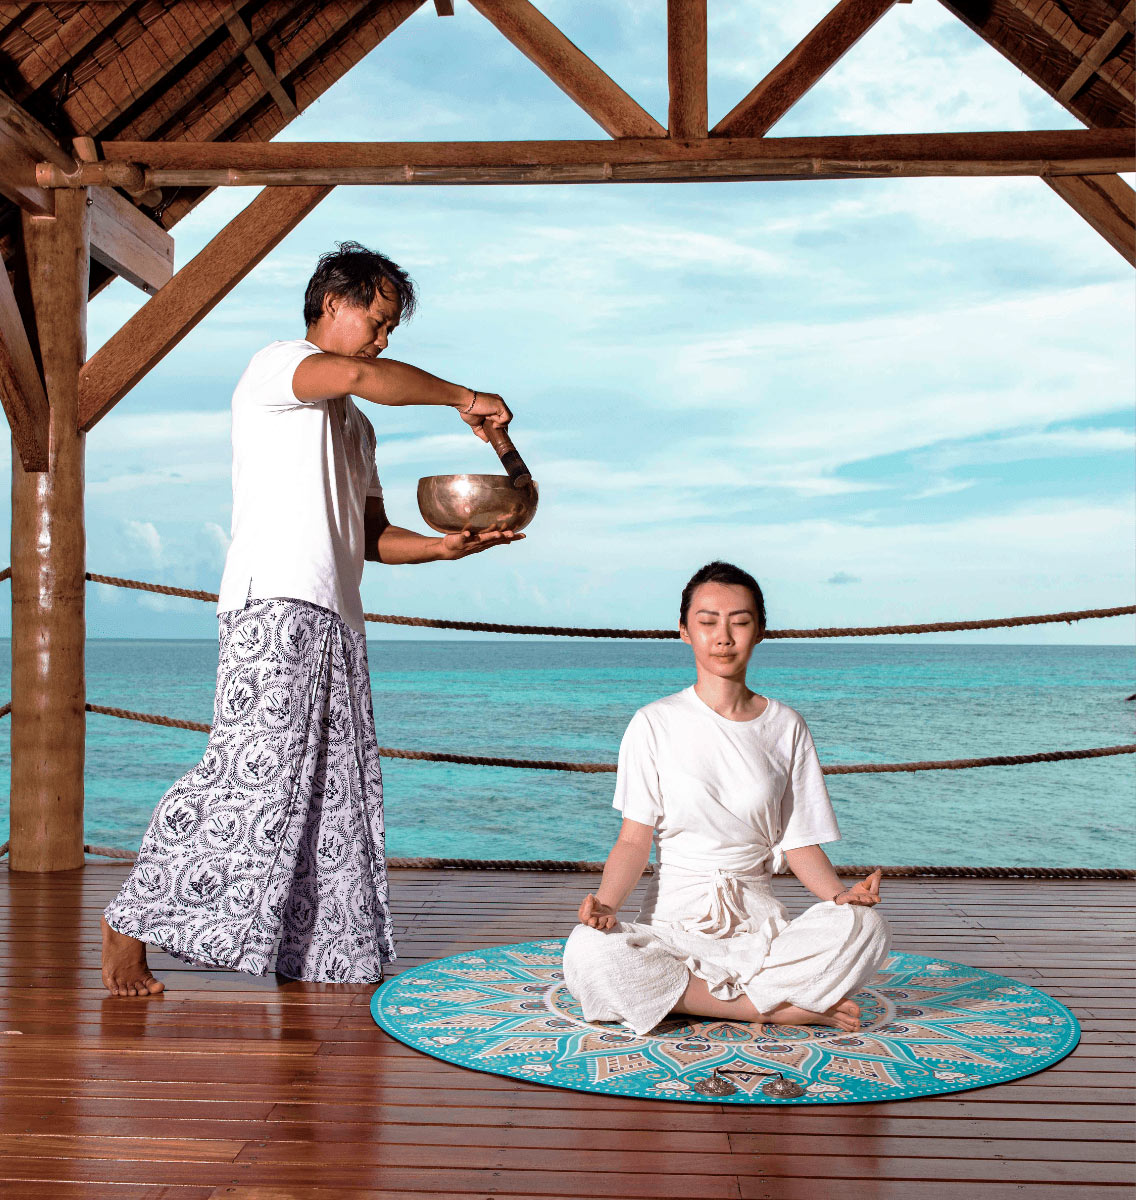 Yoga and meditation deck on Elang private residence, exclusive private island at Bawah Reserve, Indonesia.